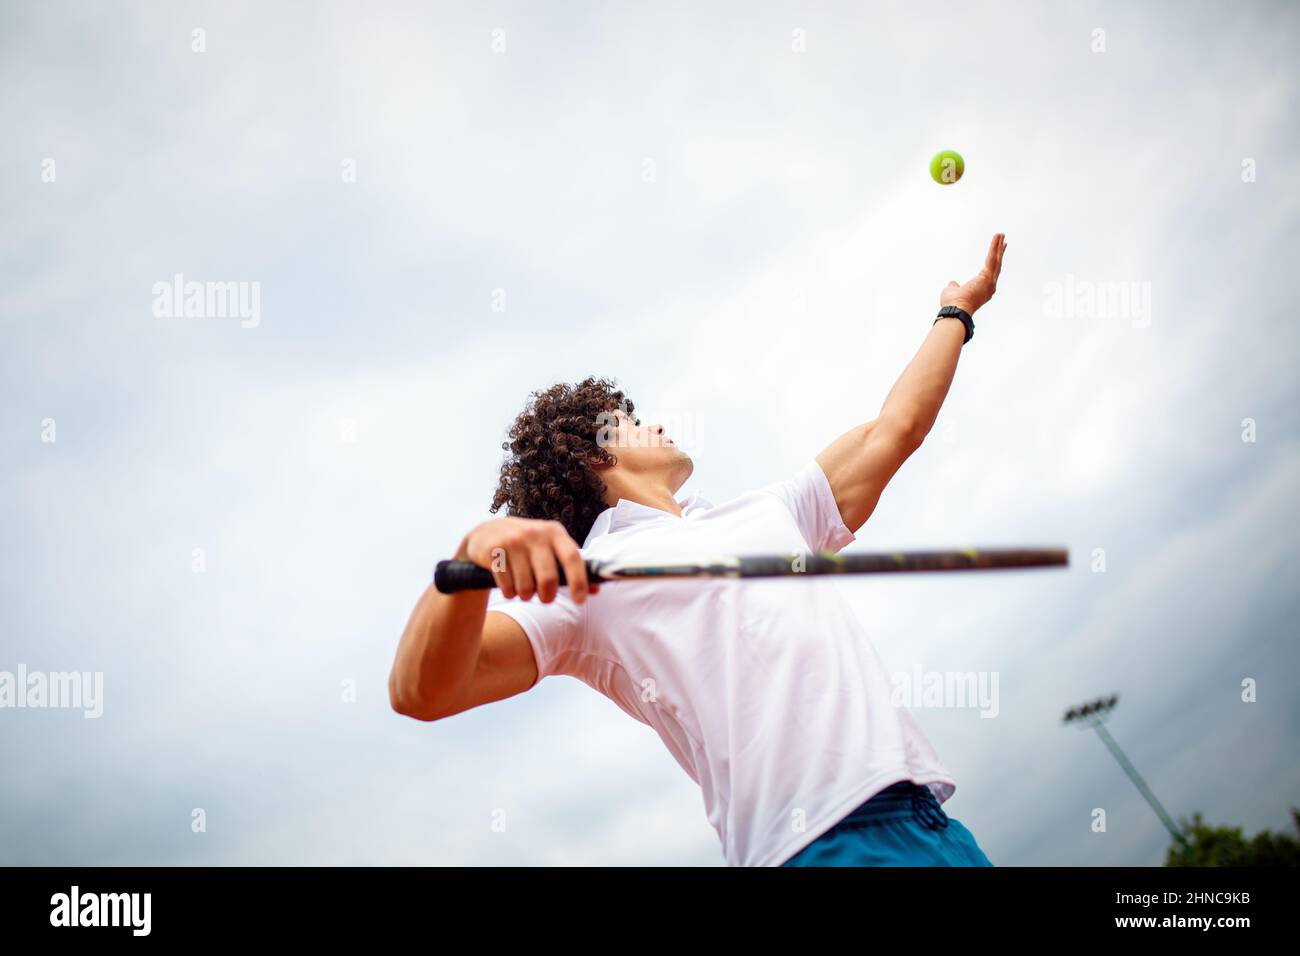 Young handsome tennis player with racket and ball prepares to serve at beginning of game or match. Stock Photo